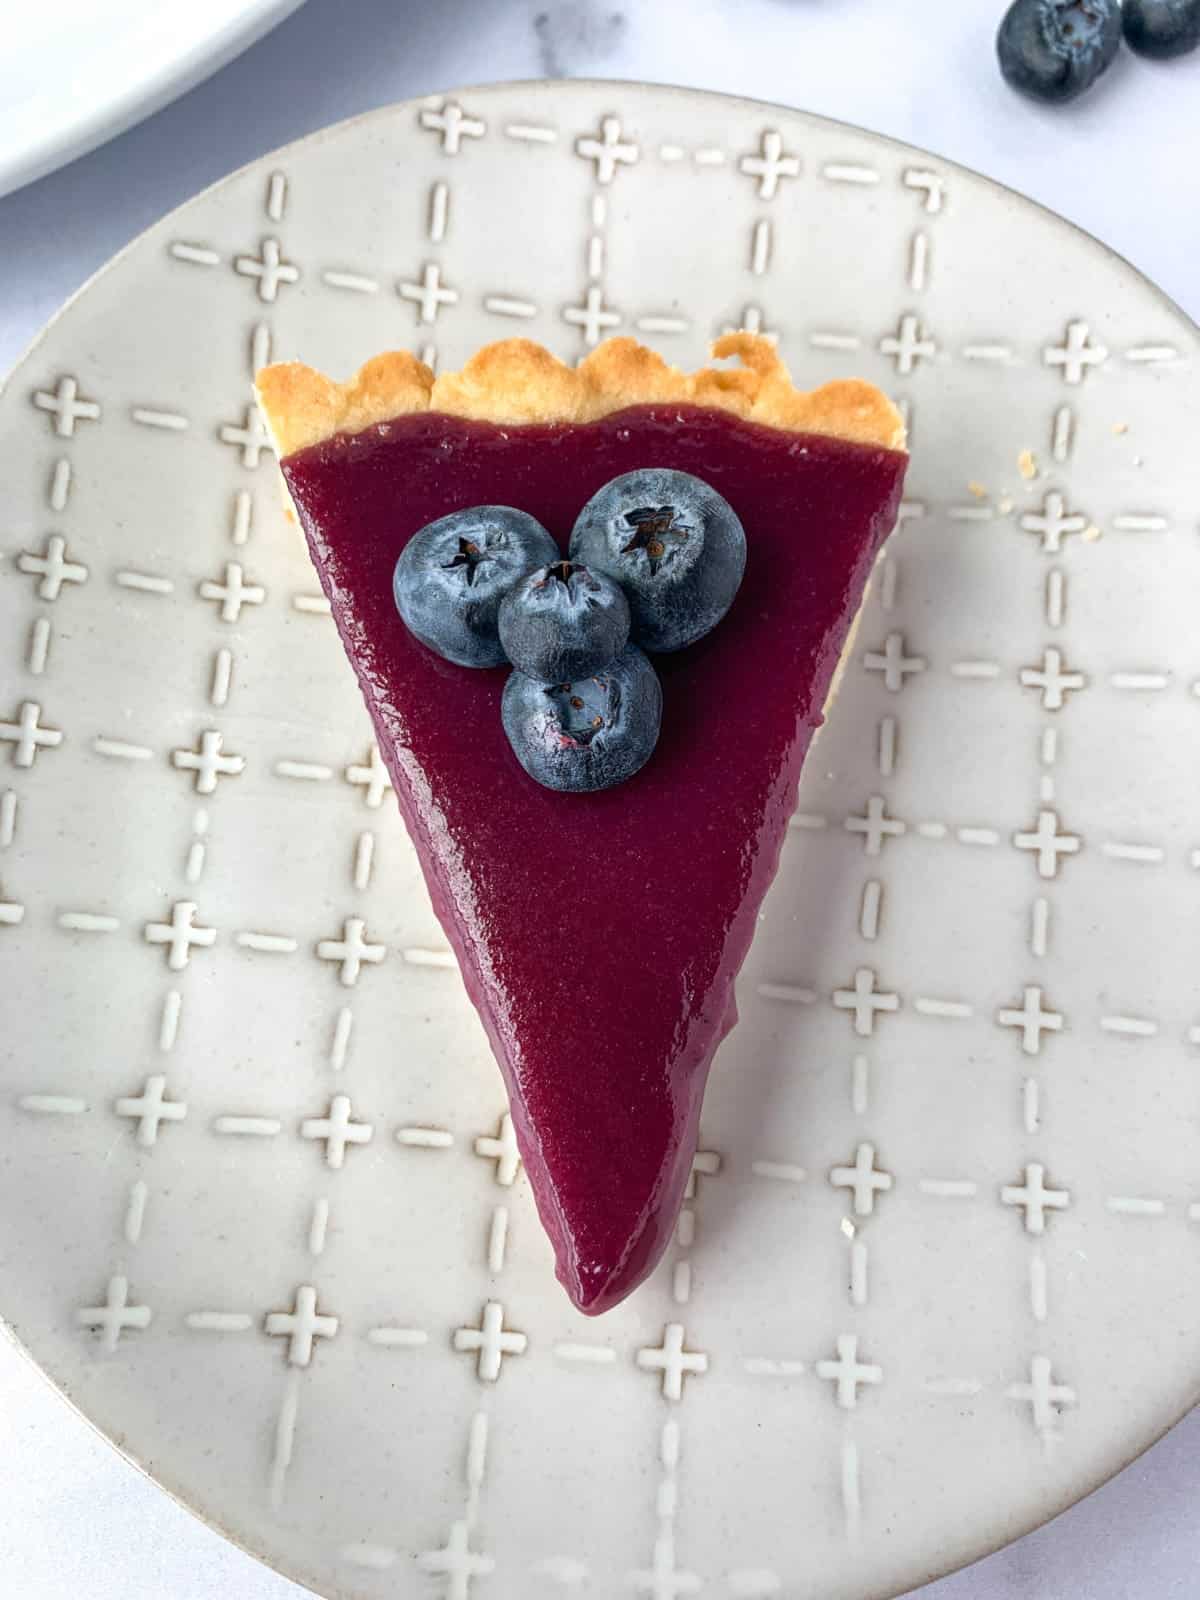 Top view of slice of Blueberry Curd Tart.